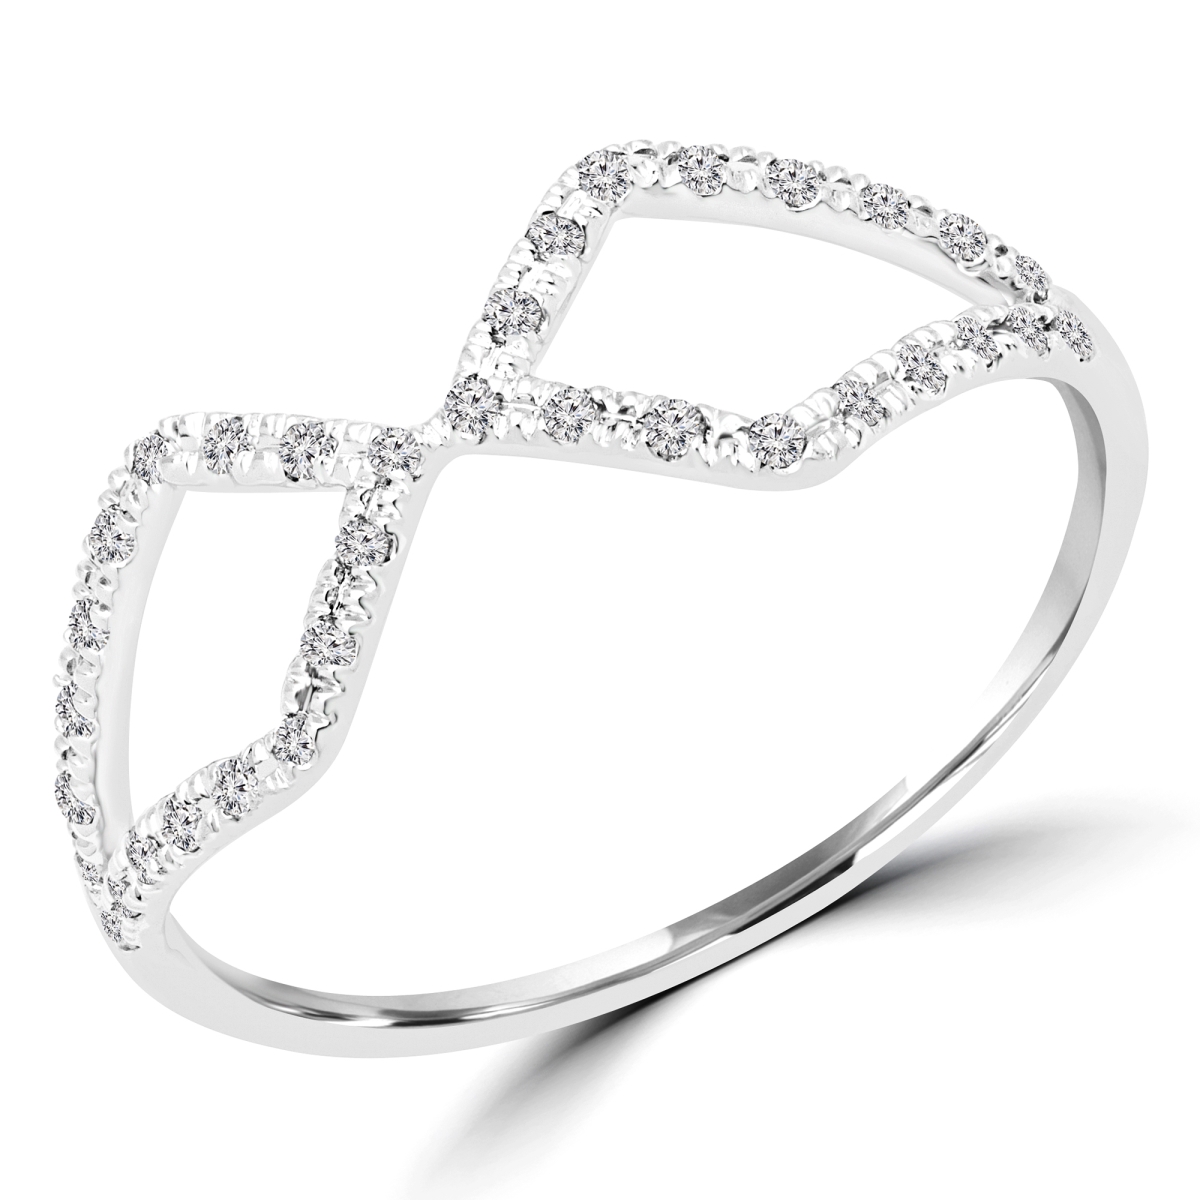 Picture of Majesty Diamonds MDR170055-3.25 0.12 CTW Round Diamond Cocktail Ring in 14K White Gold - 3.25